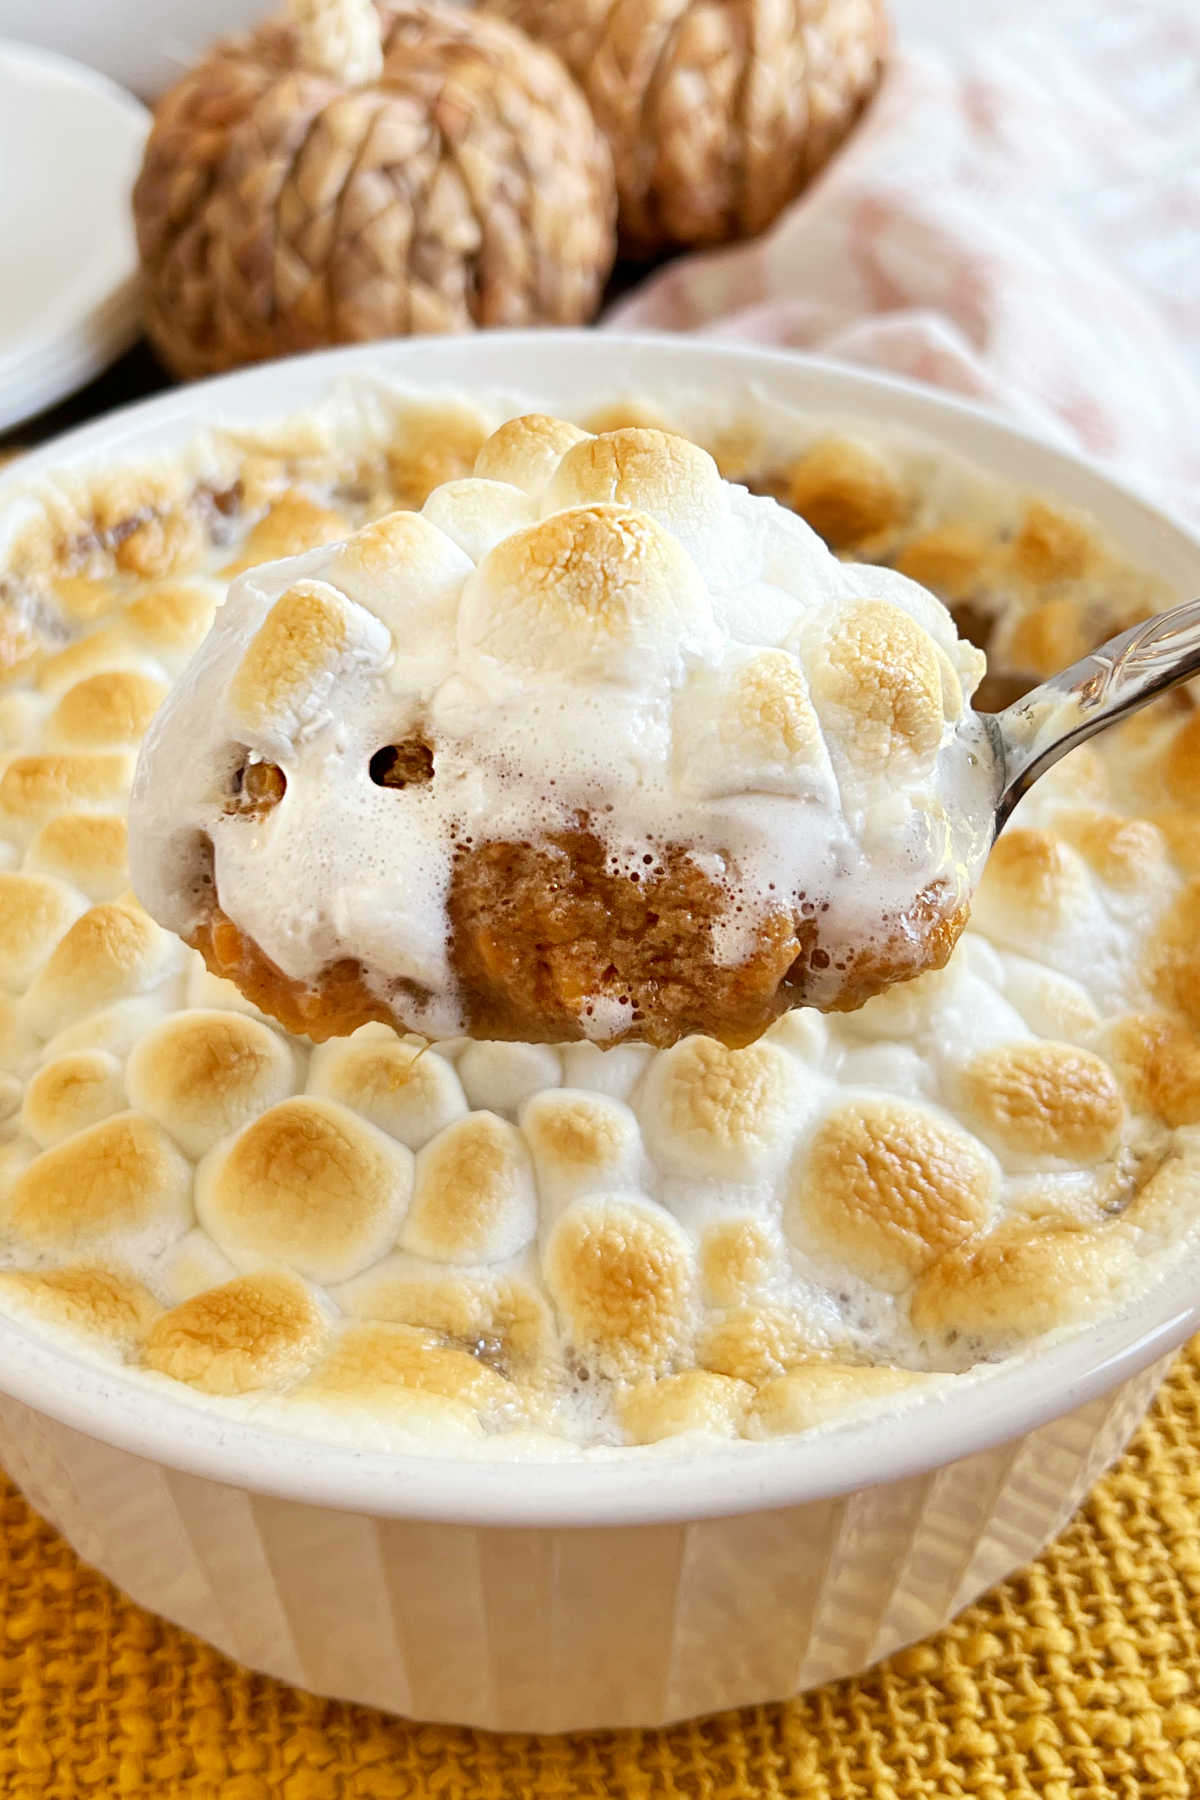 canned sweet potato casserole with marshmallow topping on spoon.